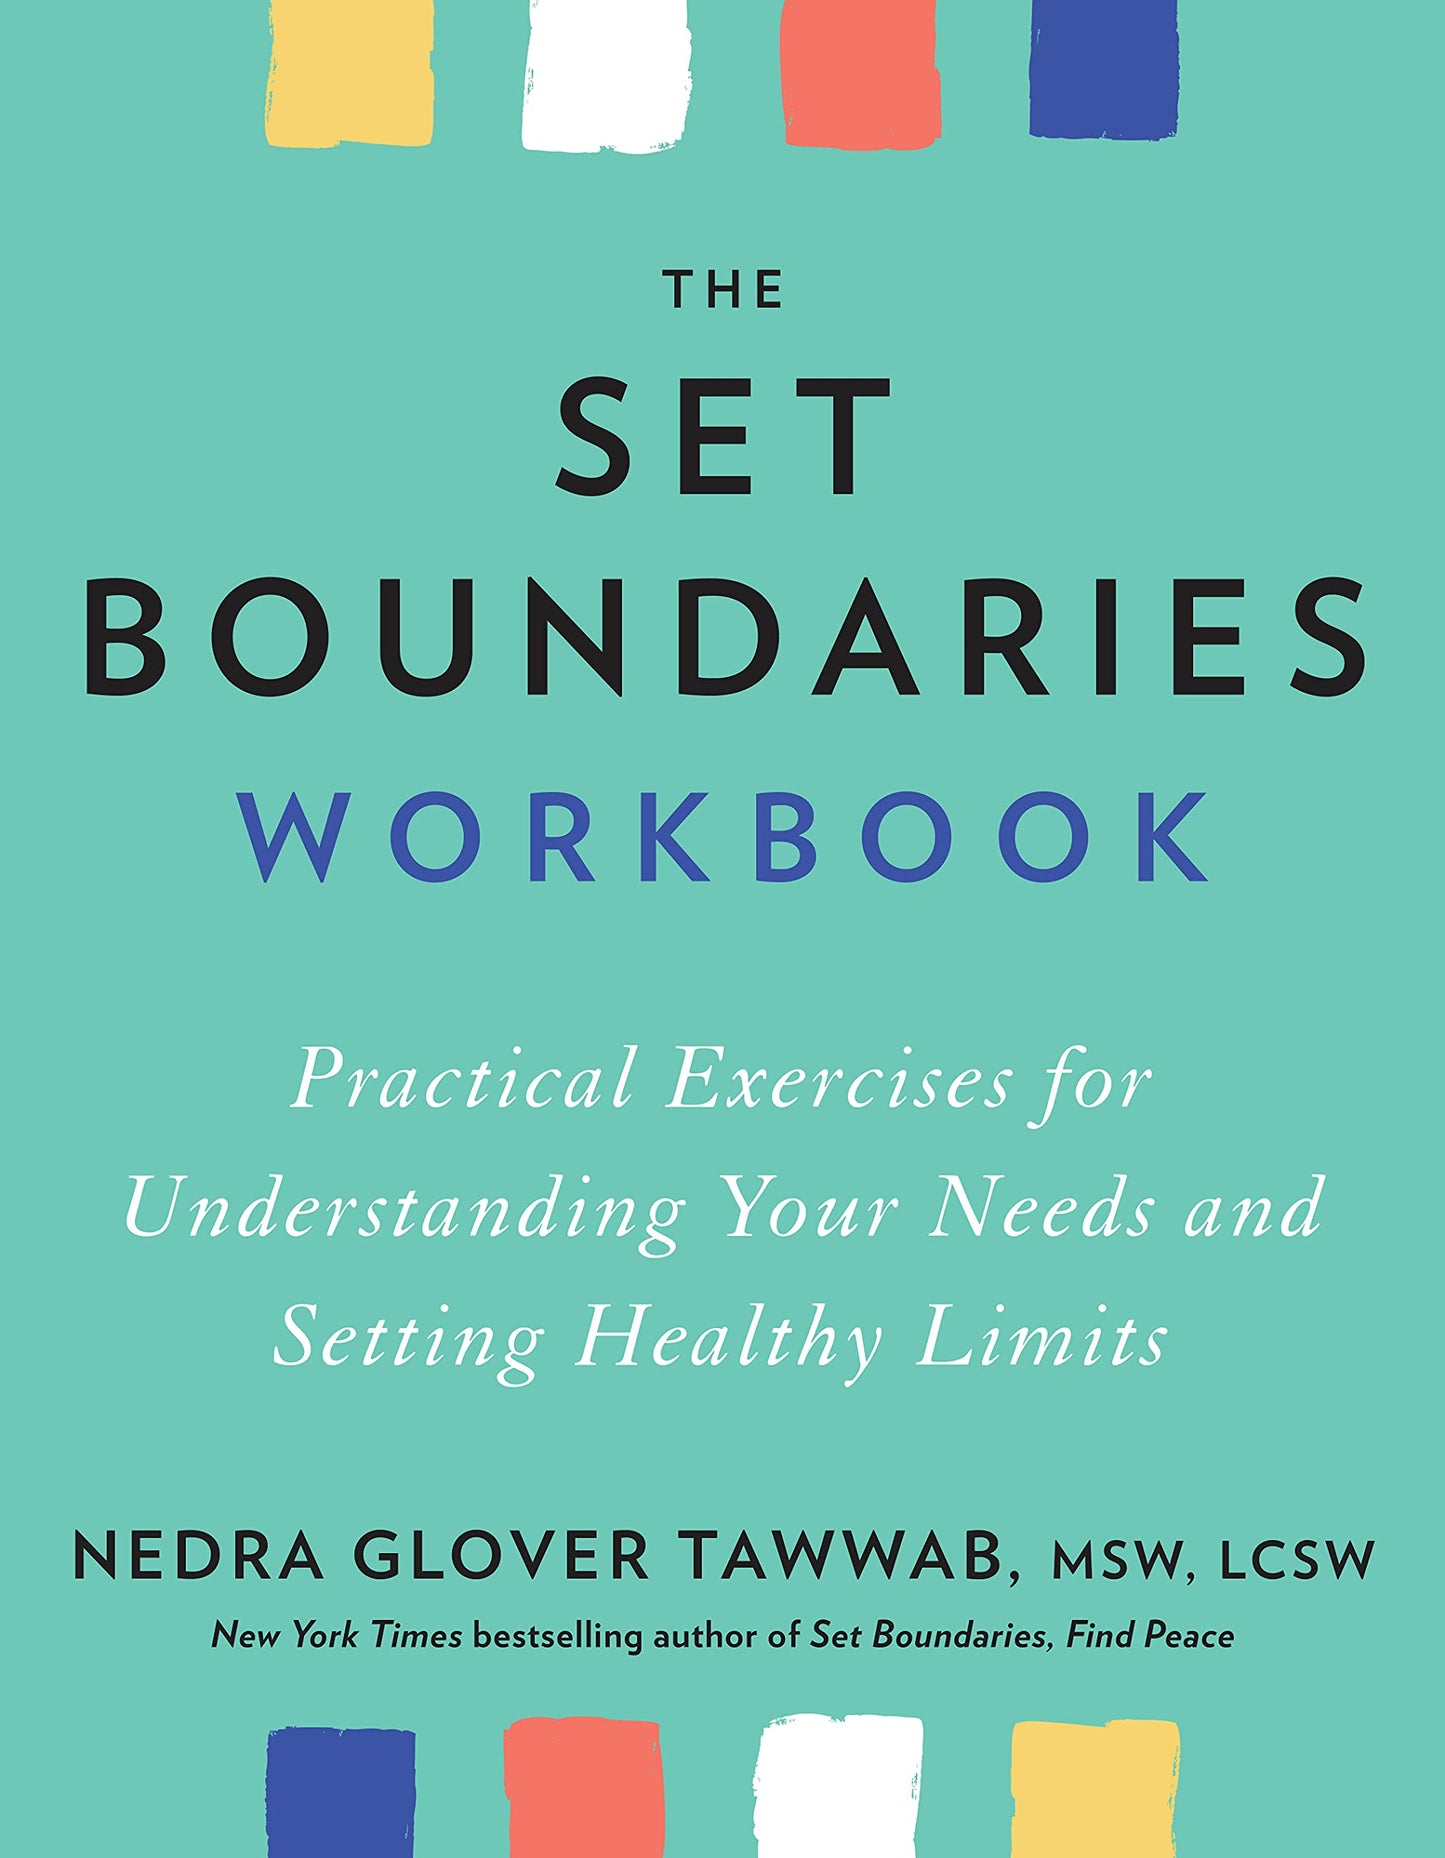 The Set Boundaries Workbook // Practical Exercises for Understanding Your Needs and Setting Healthy Limits